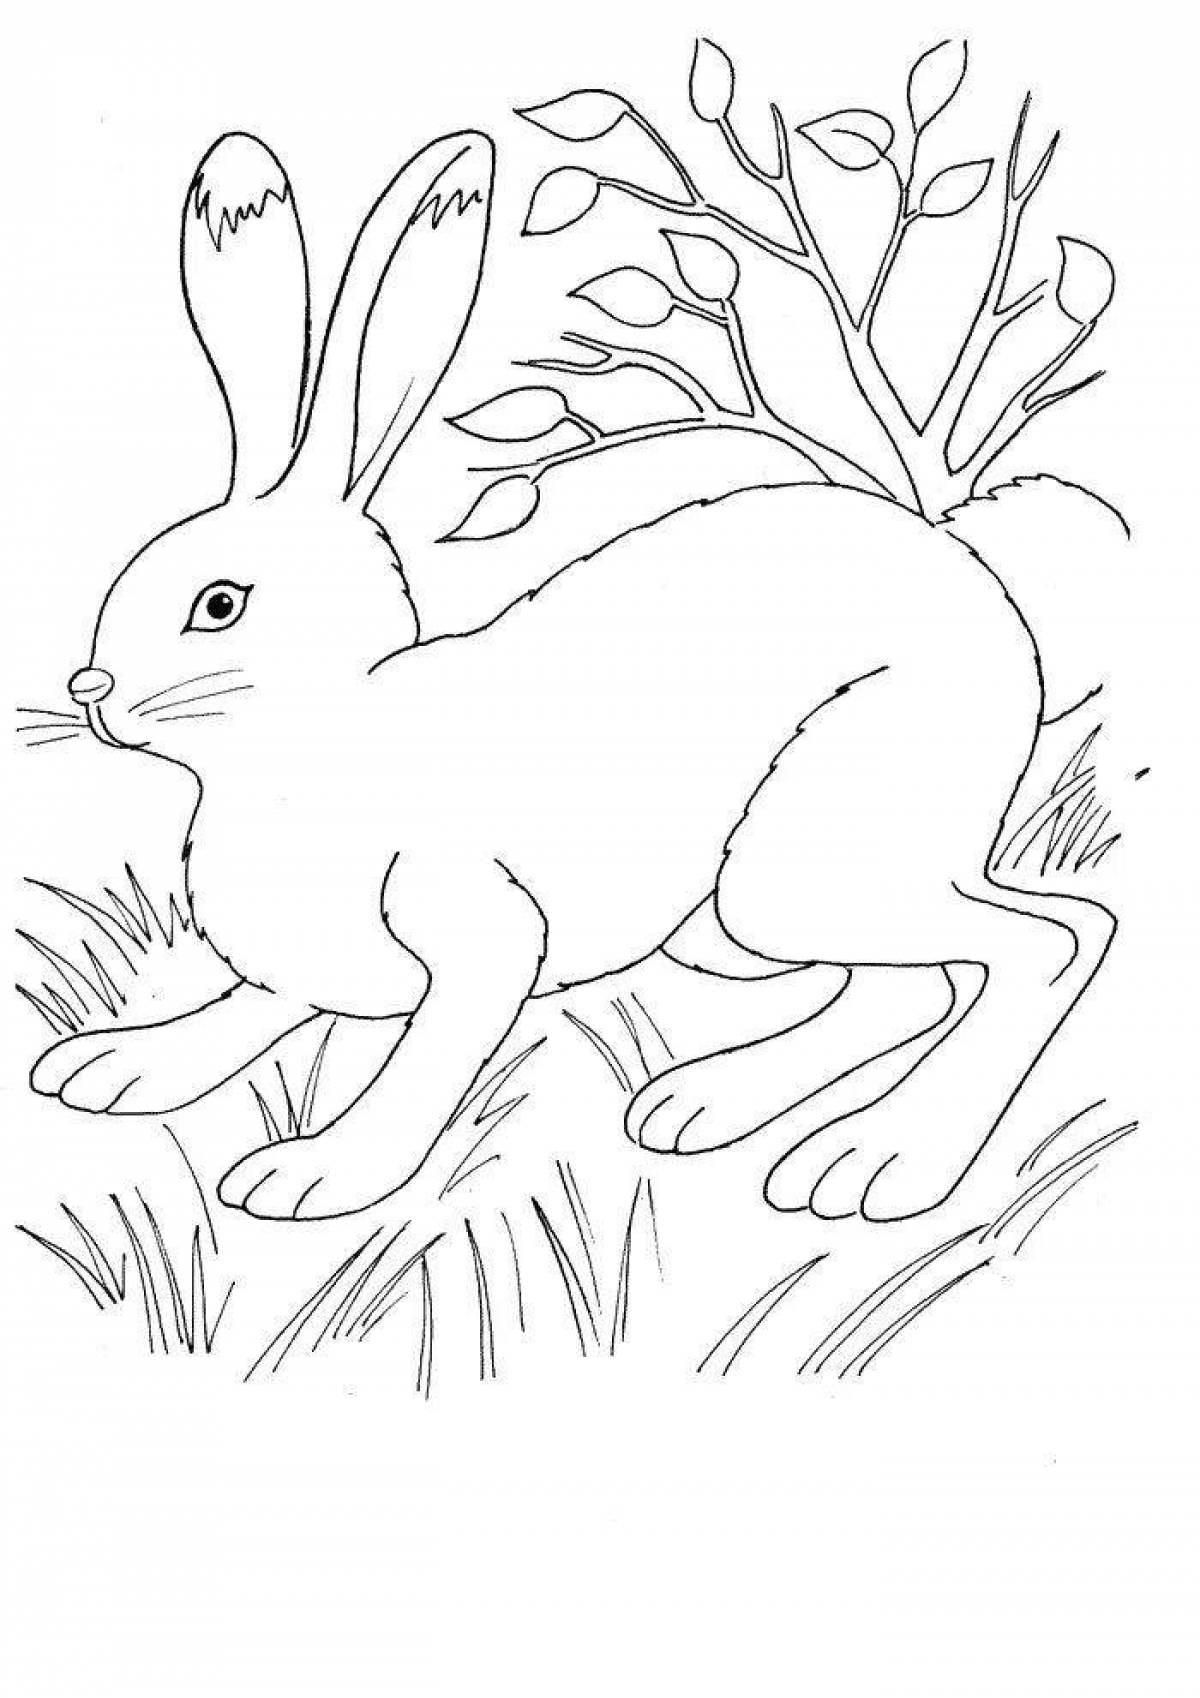 Playful drawing of a hare